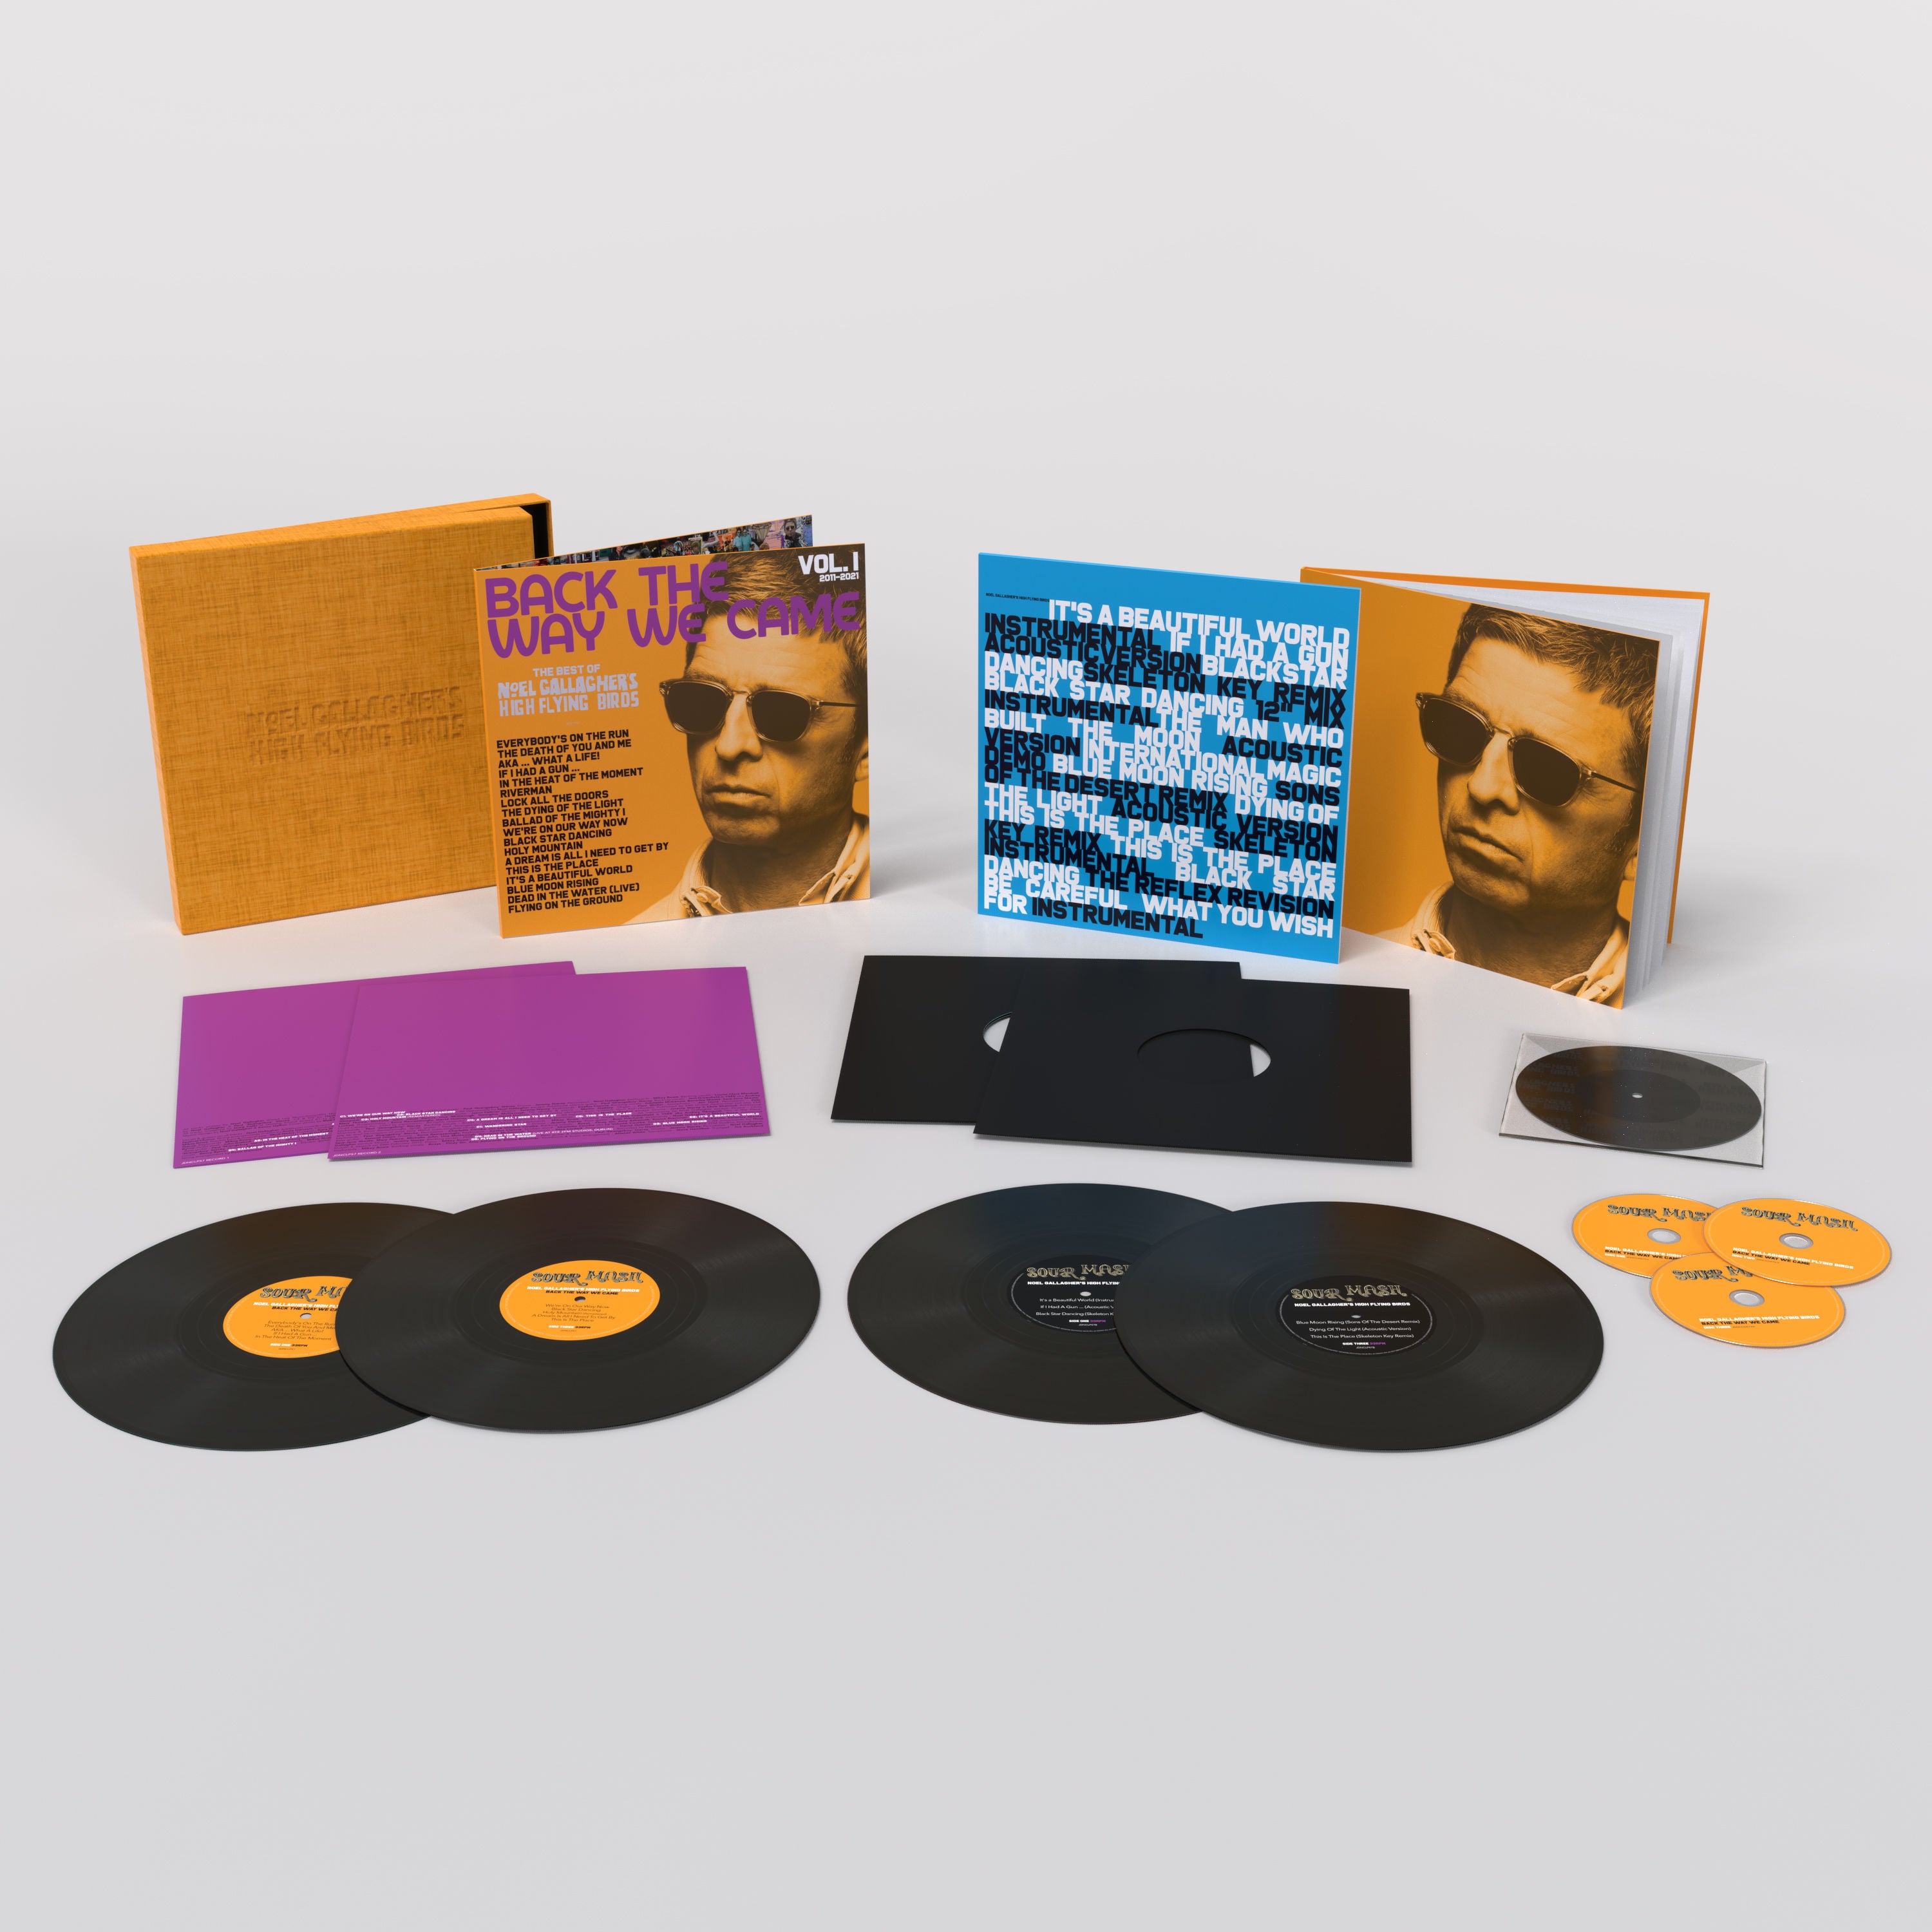 Noel Gallagher's High Flying Birds - Back The Way We Came - Vol. 1 (2011 - 2021): Deluxe Box Set